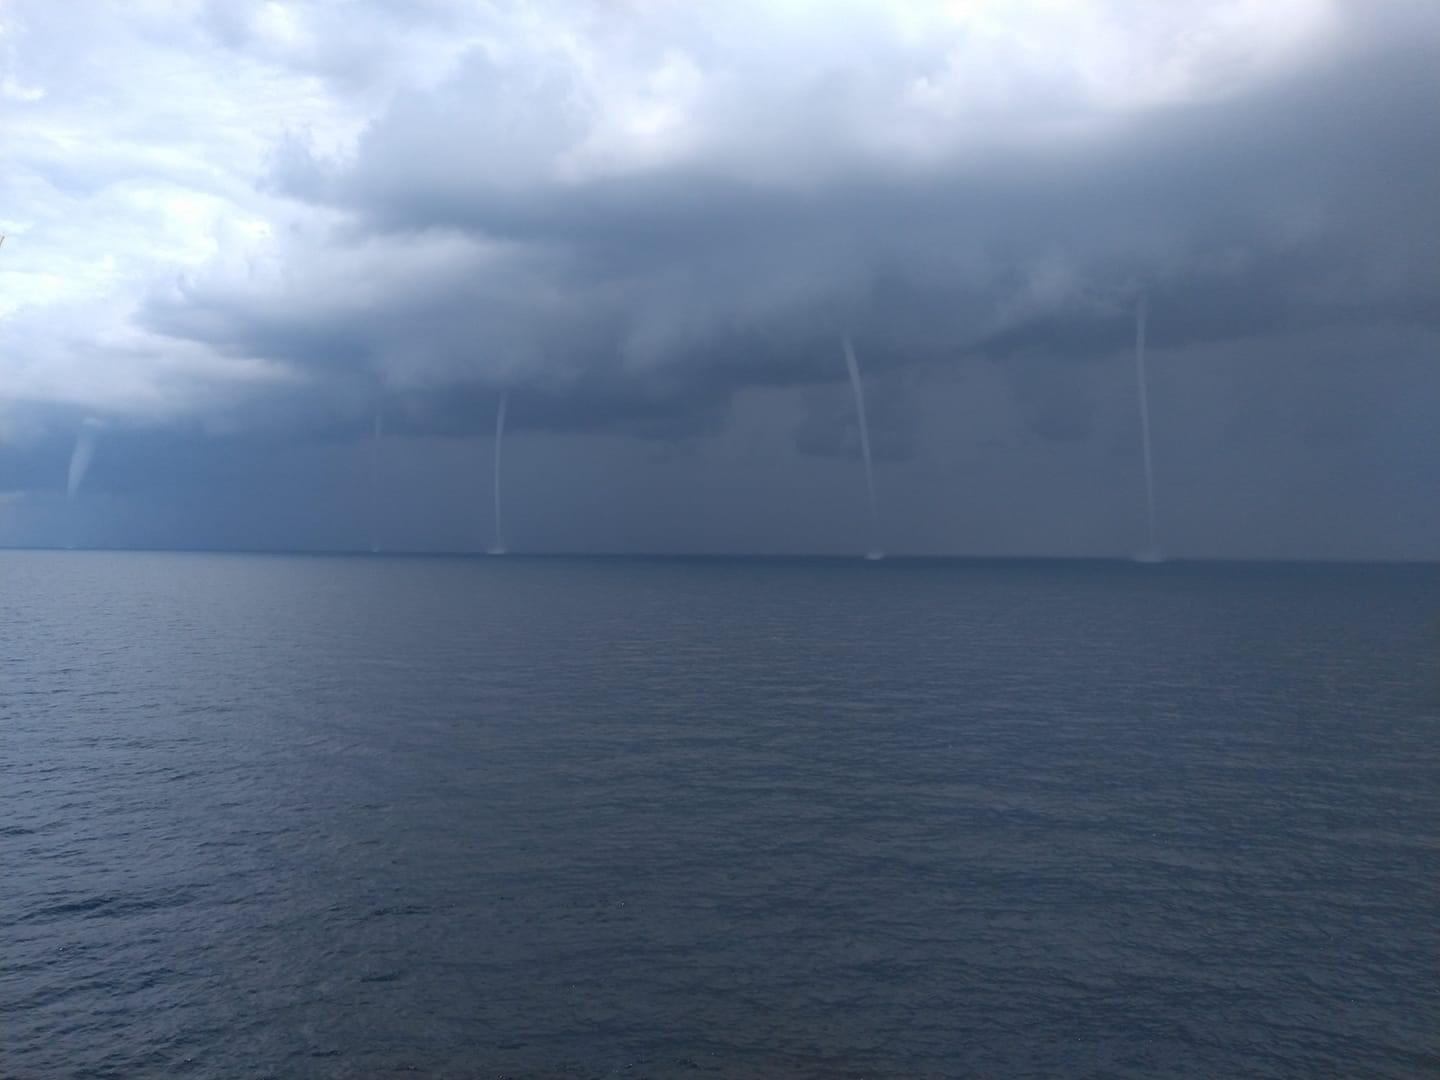 There was extremely tense weather conditions in the Gulf of Mexico yesterday - The photo, Nature, Gulf of Mexico, Weather, Tornado, USA, Reddit